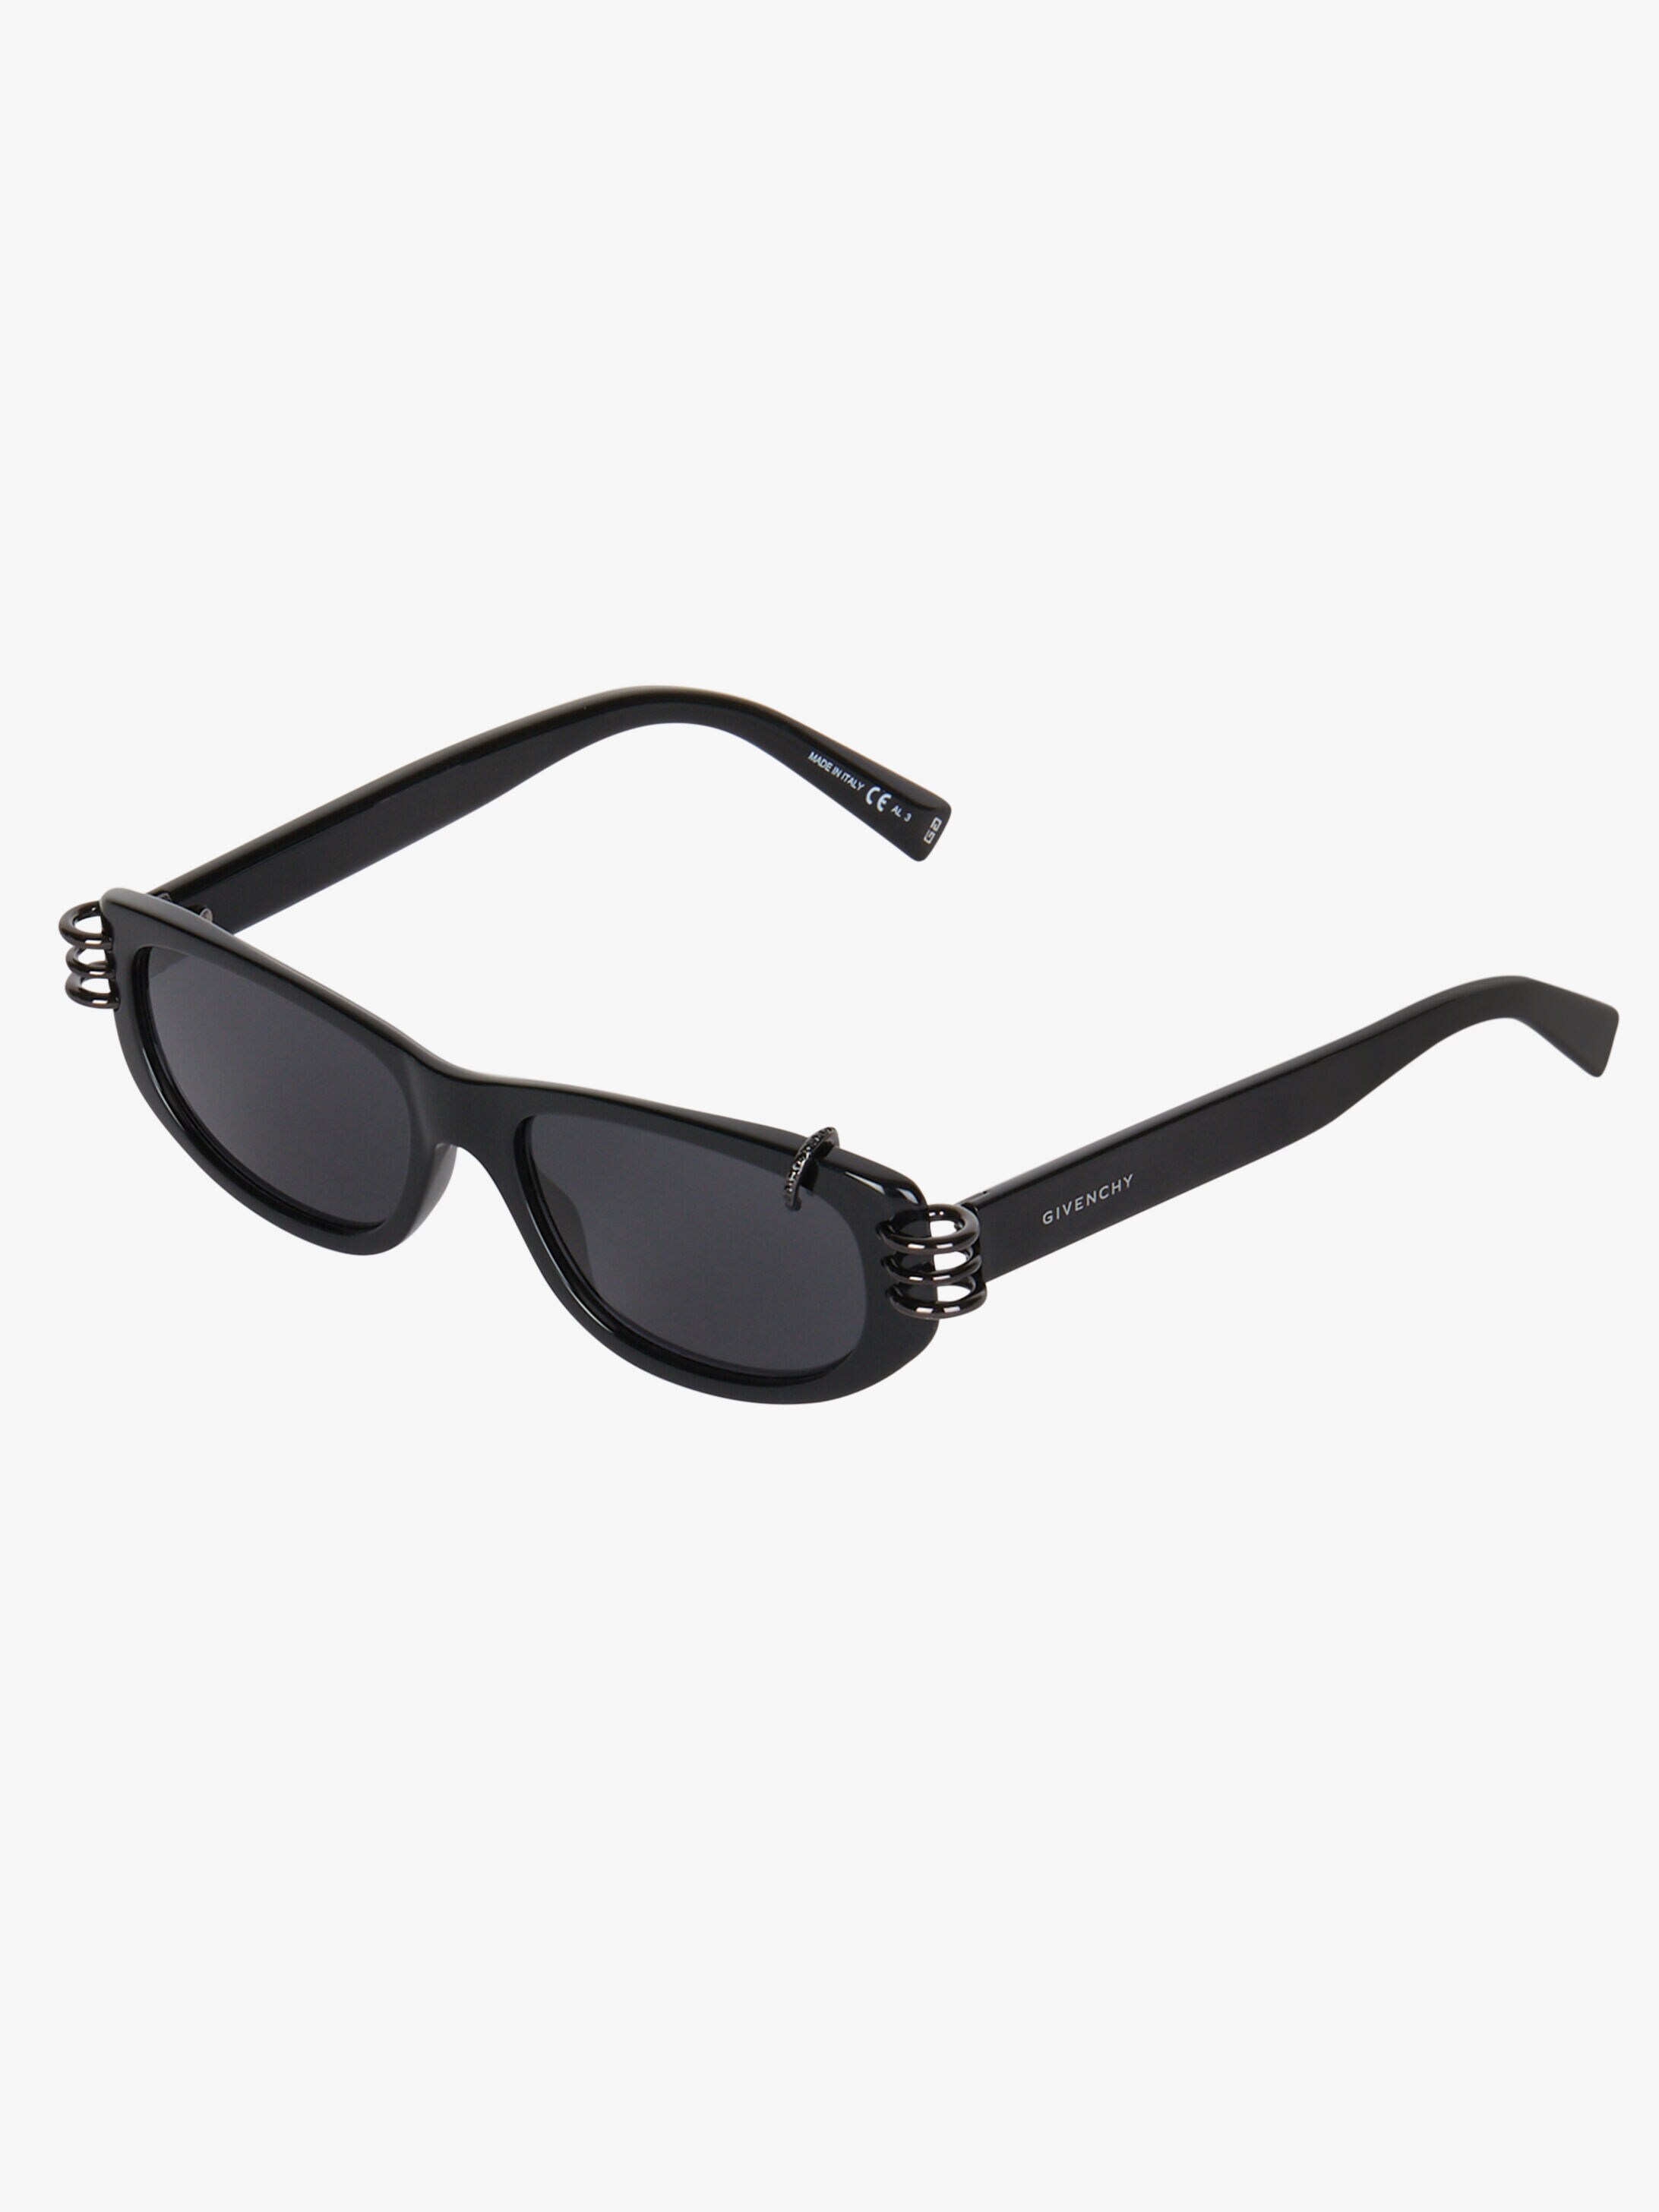 givenchy ladies sunglasses